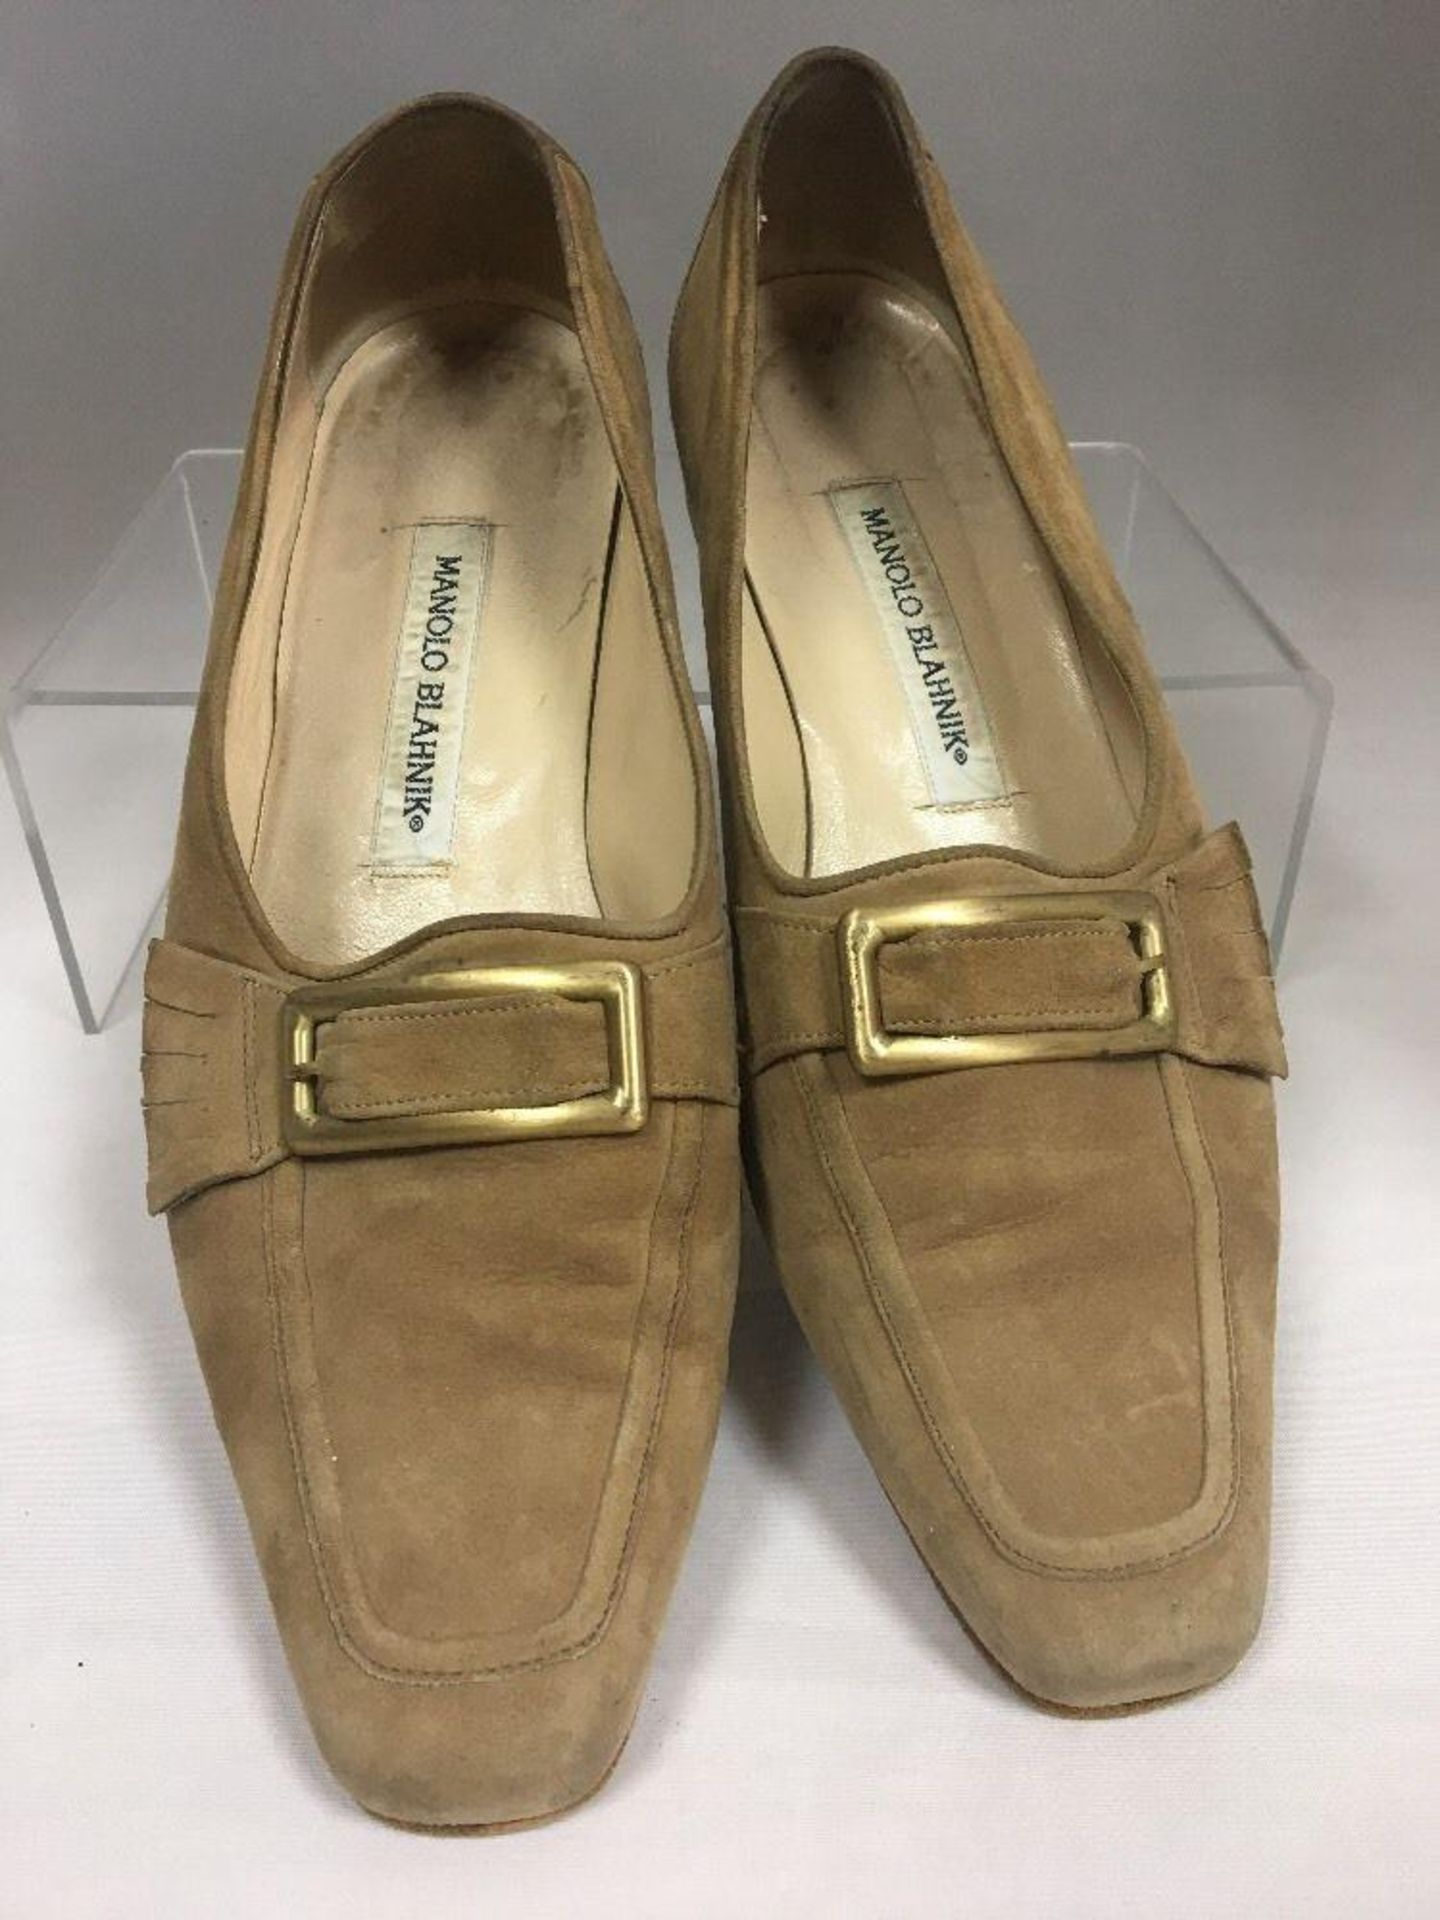 Manolo Blahnik Suede Beige Loafers Flats with Buckle size 38.5 (UK 5)